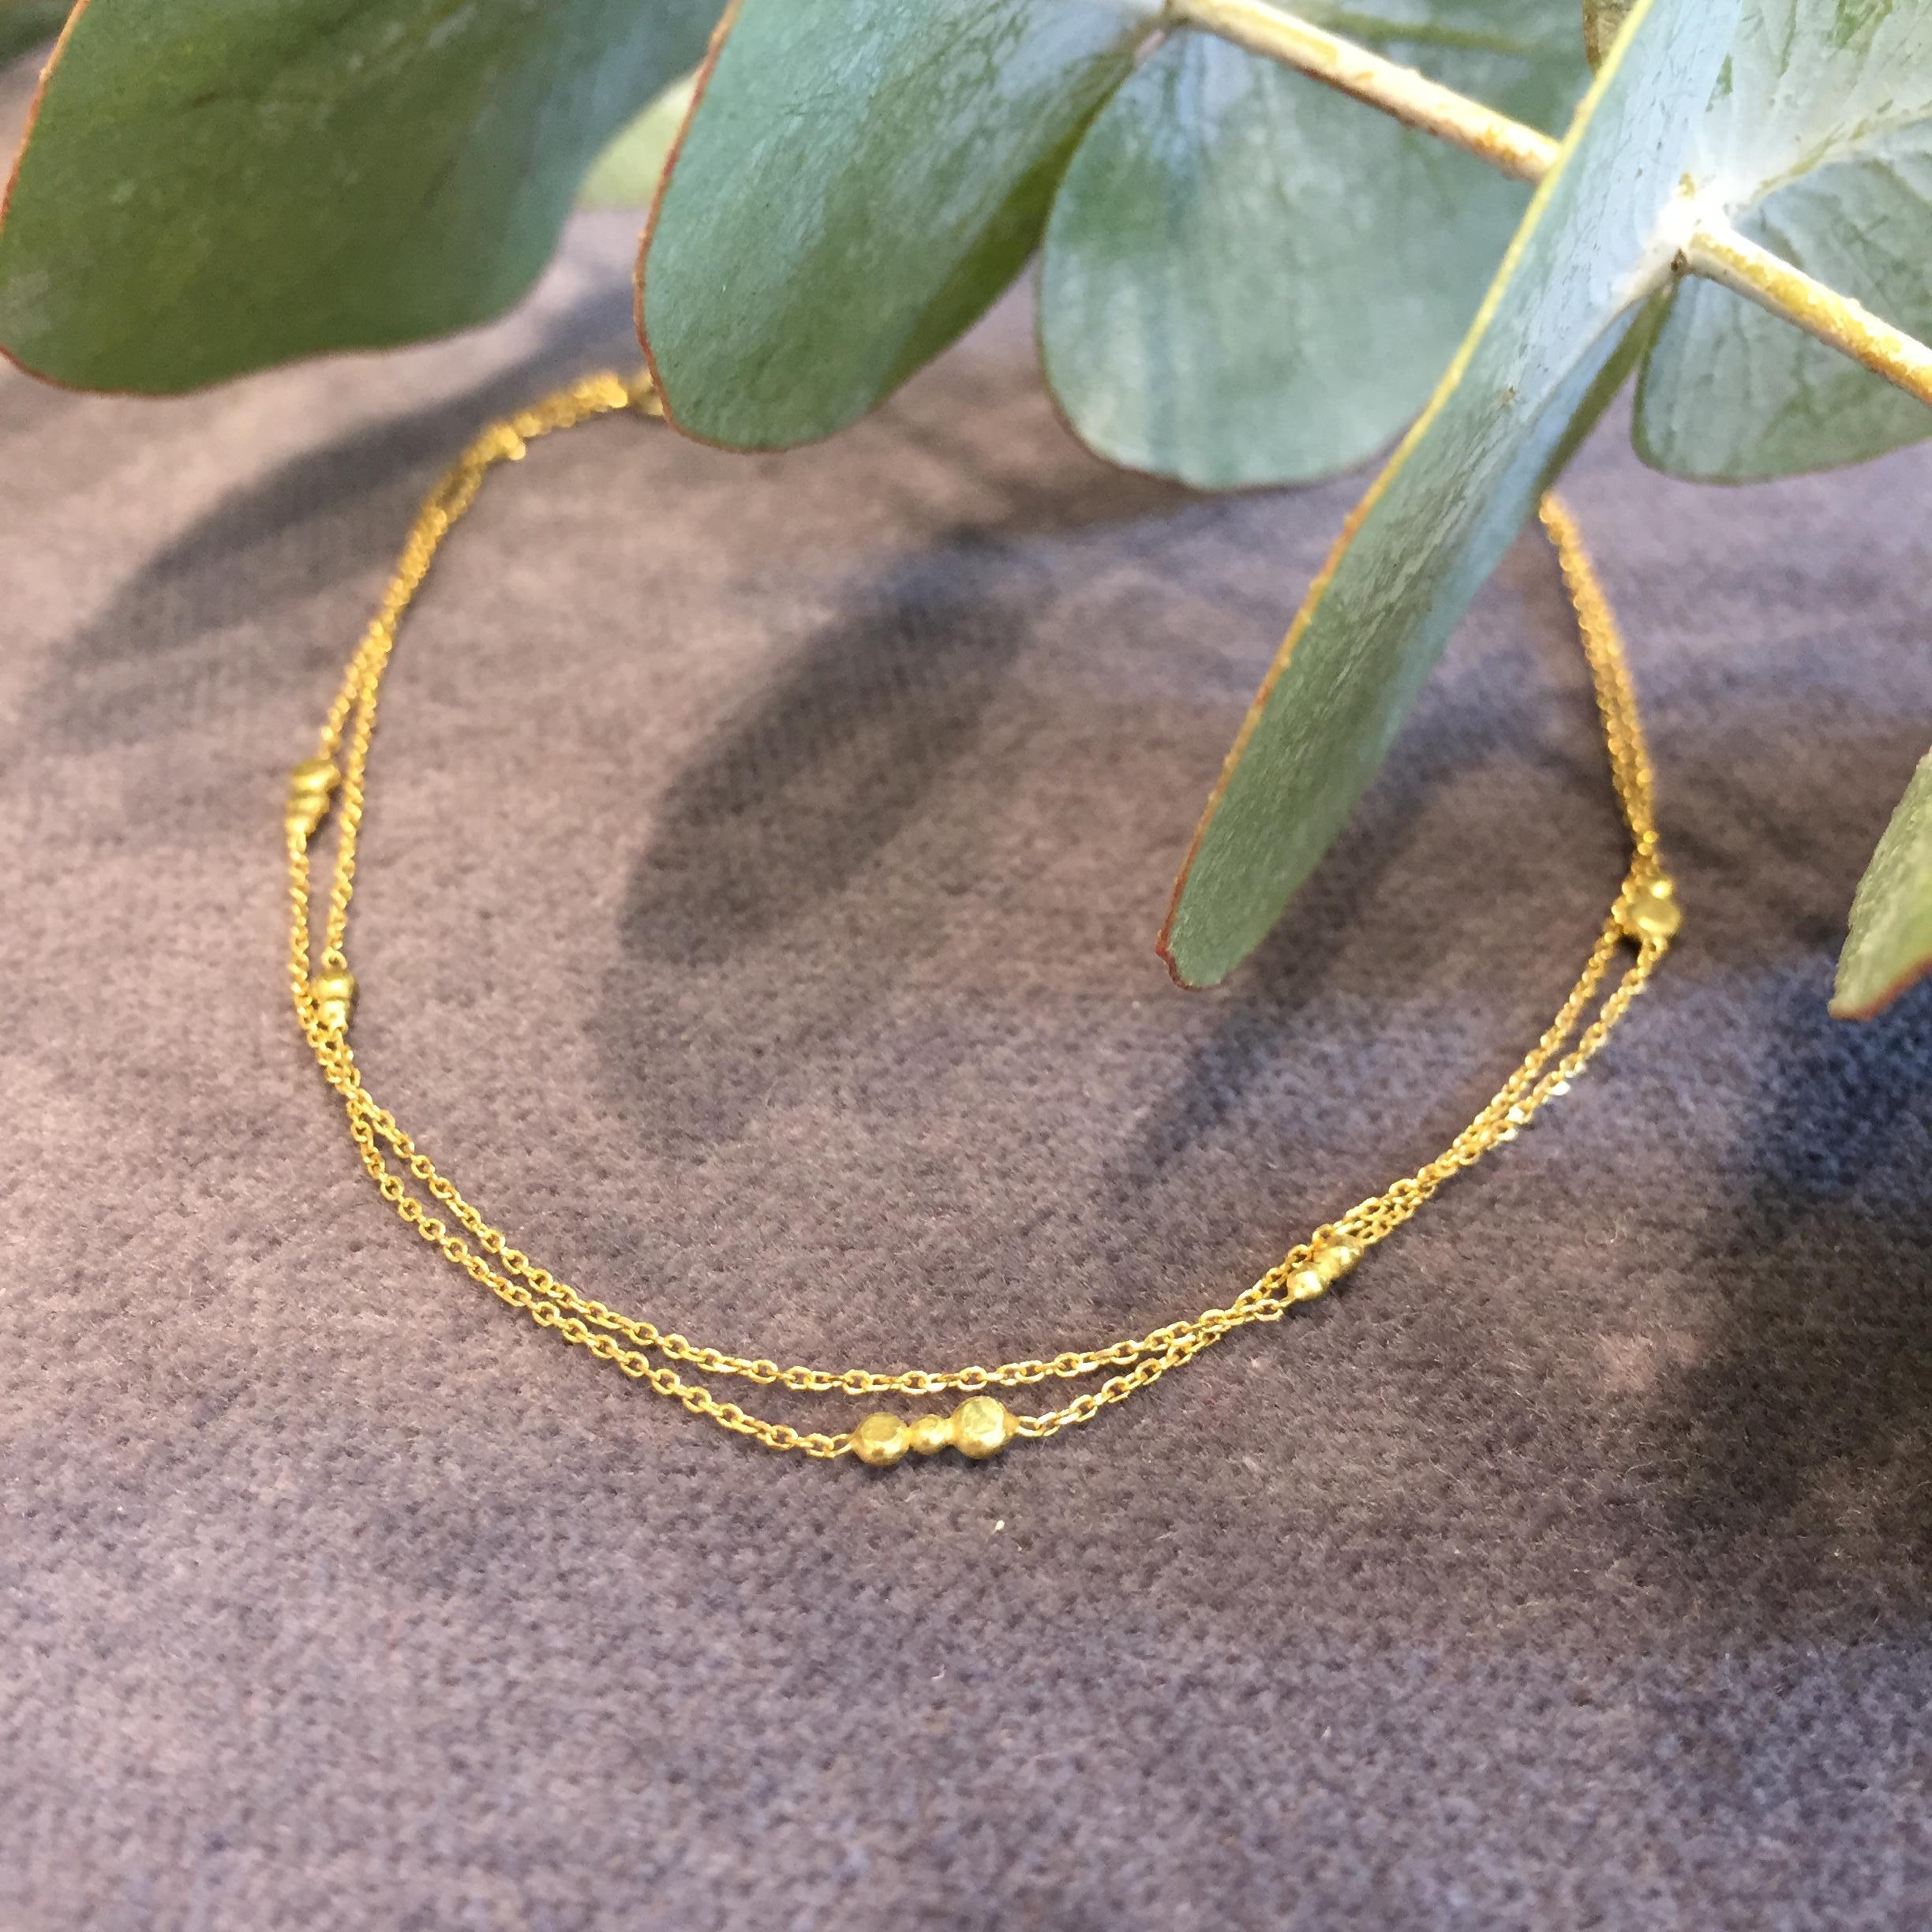 Sweet Pea double chain bracelet from the Bits and Bobs collection, handmade in 18k yellow gold. The total length of this bracelet is 17cm but it can be ordered in any required length. This gorgeous bracelet features gold disc details set by hand